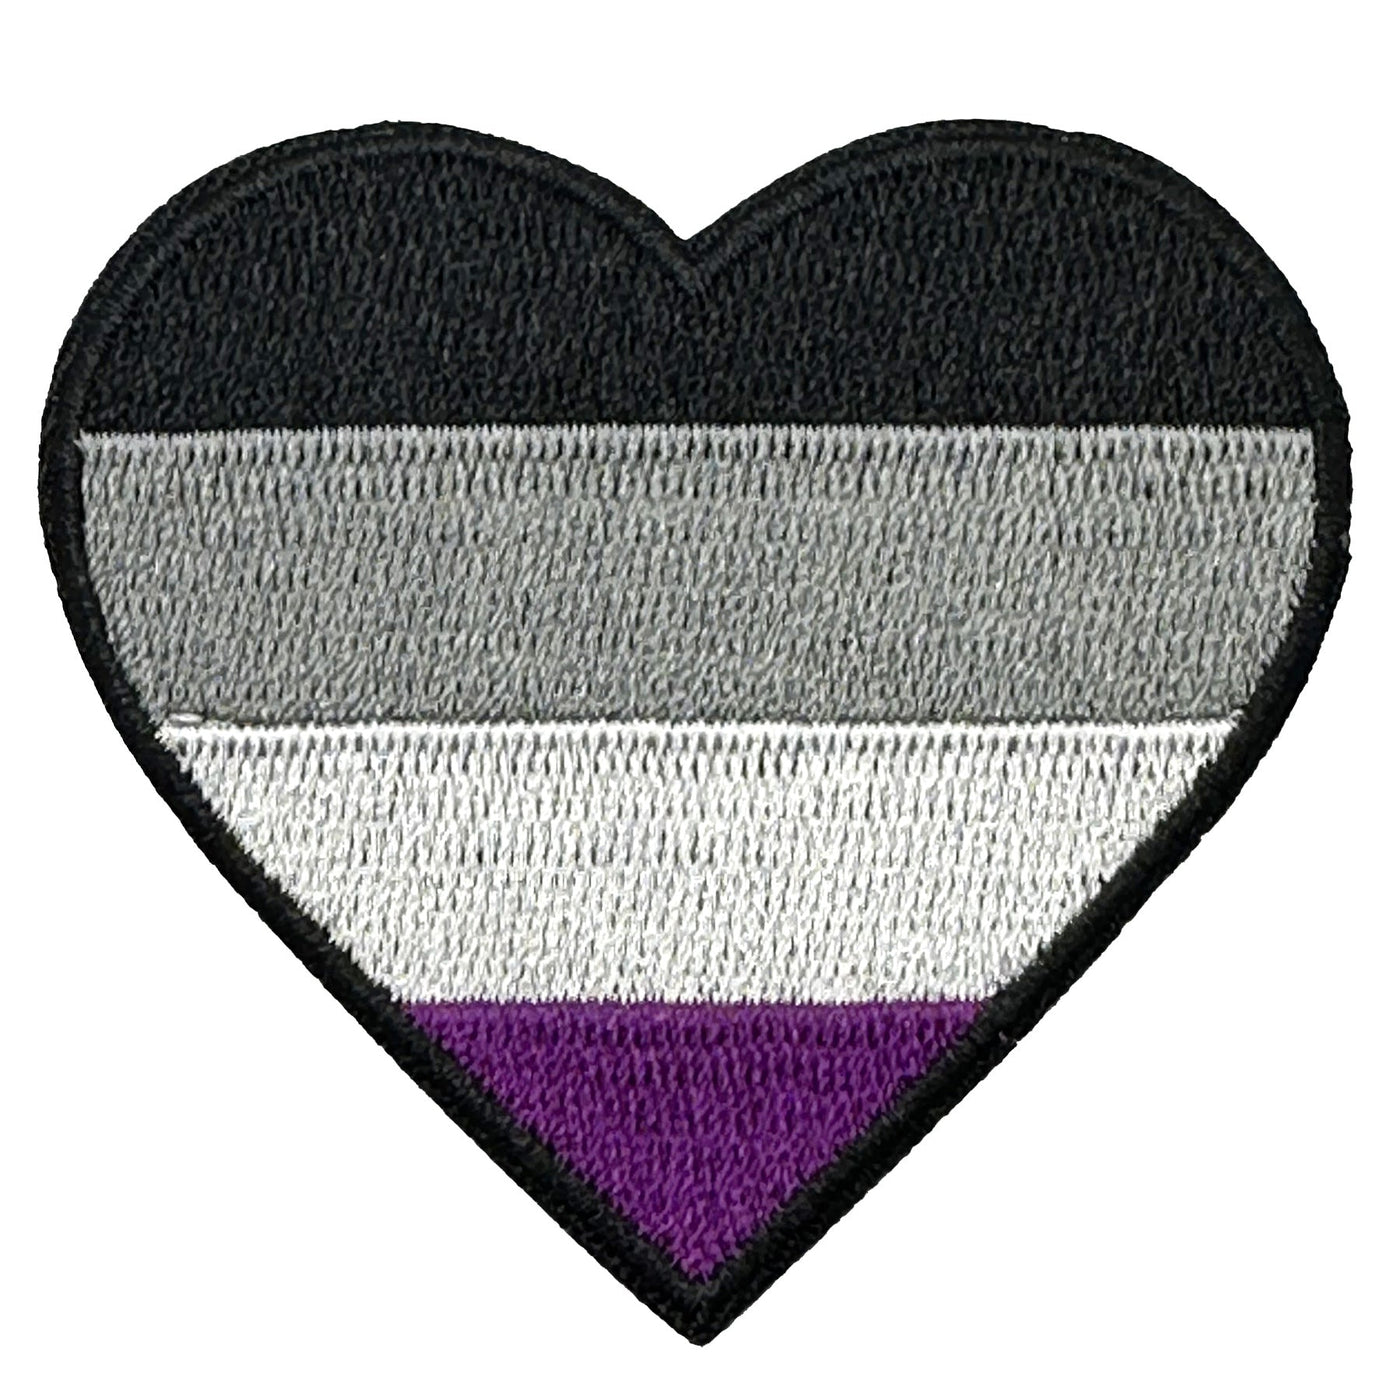 Asexual Heart Embroidered Iron-On Patch